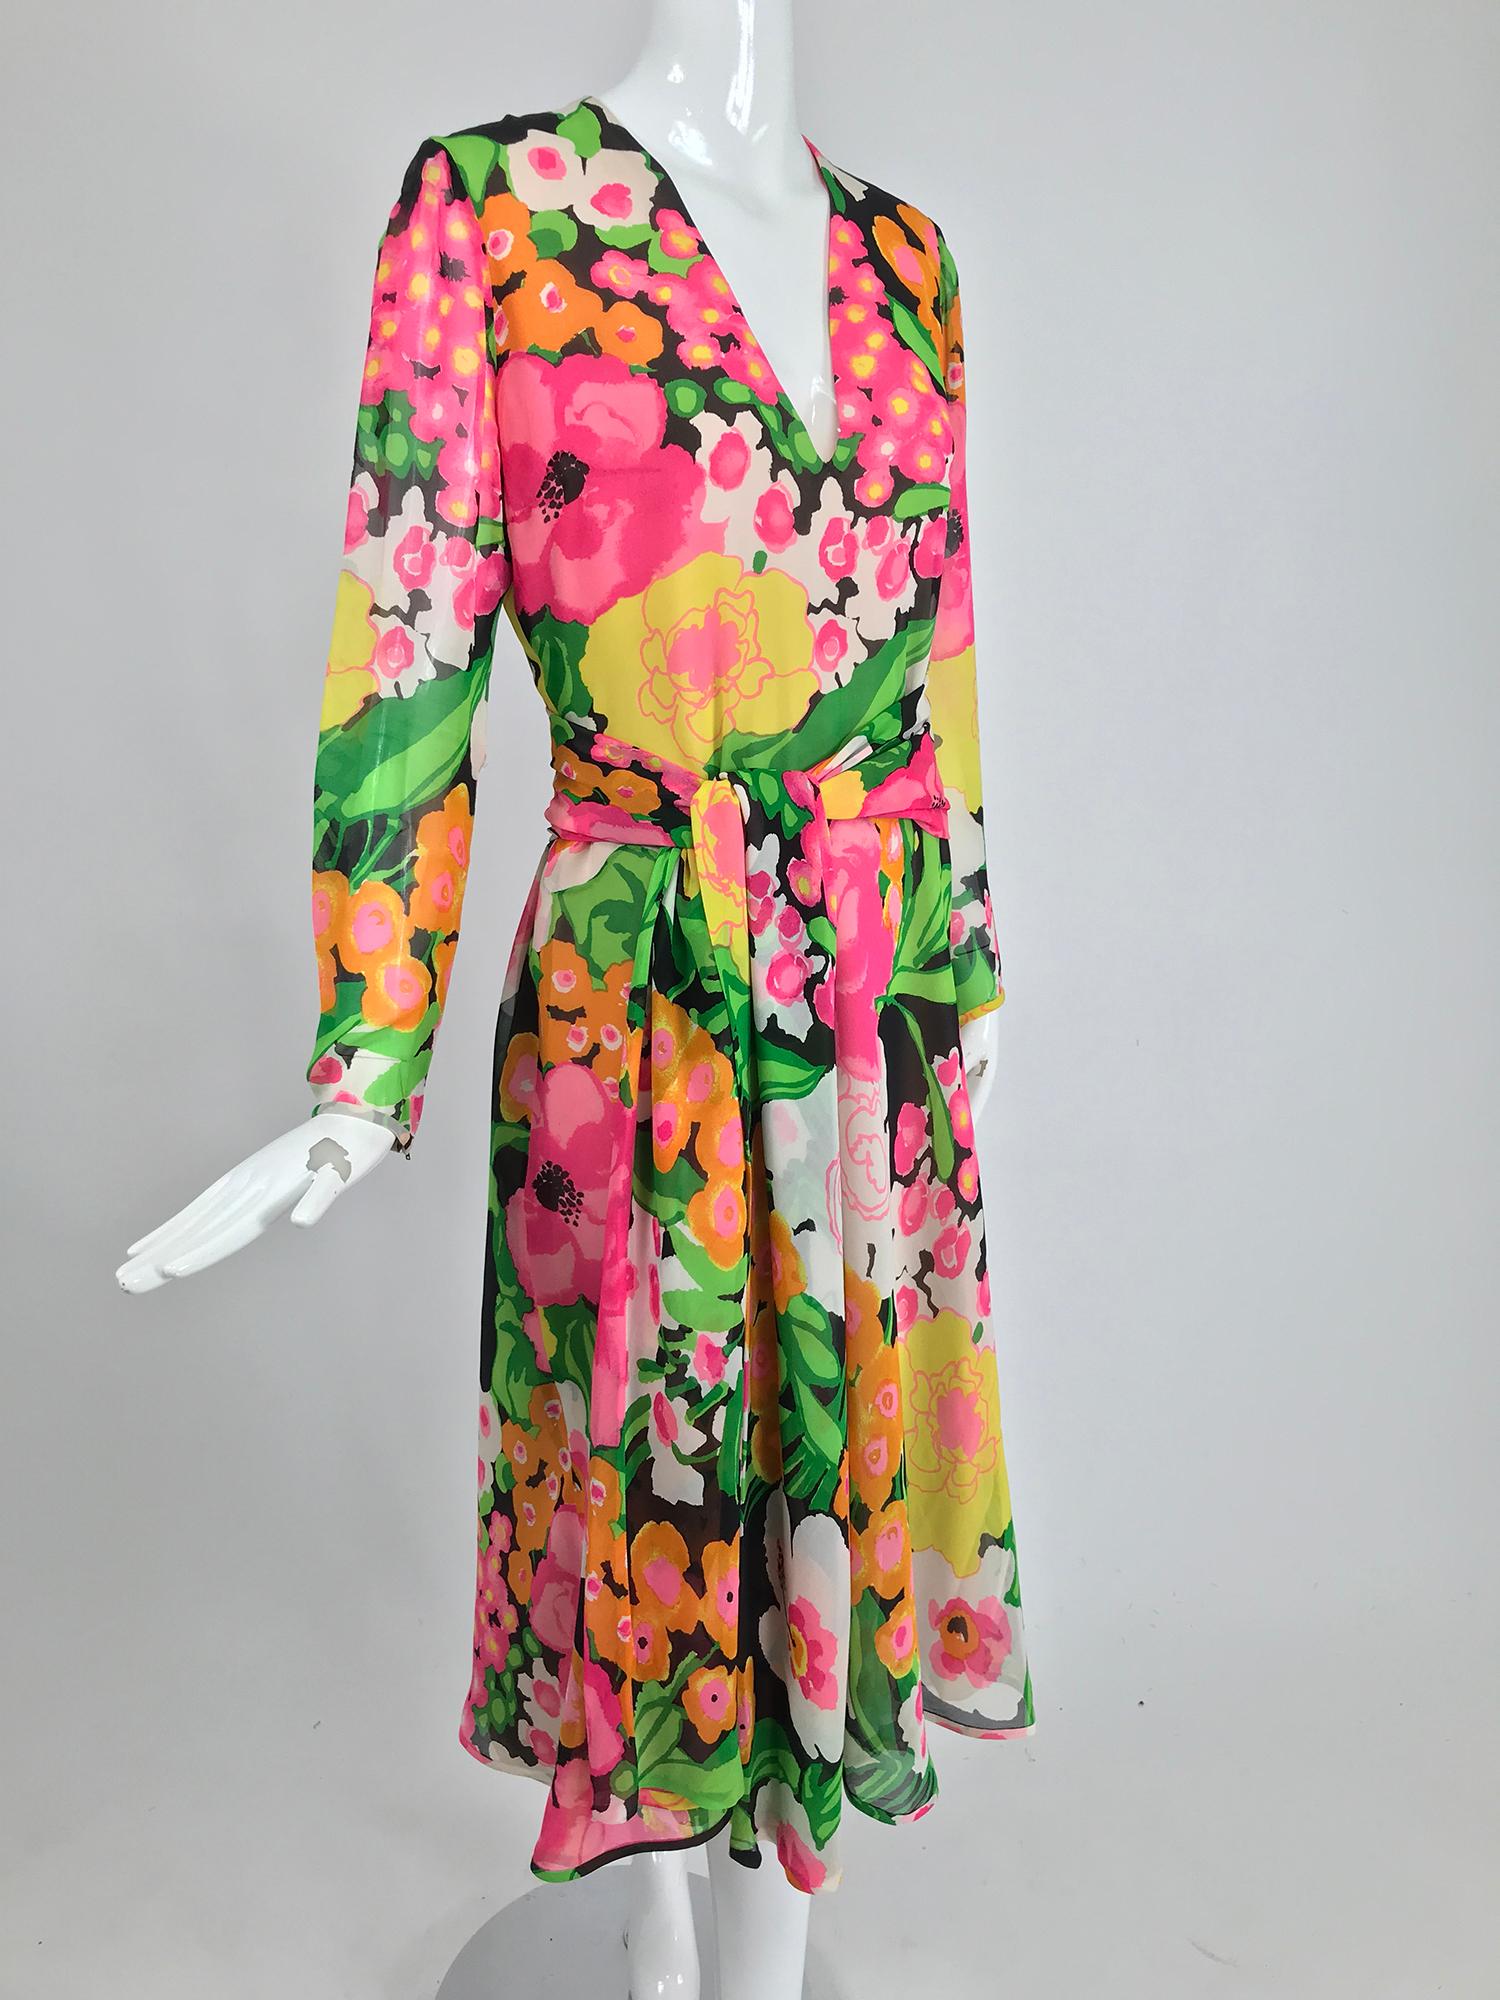 Pierre Balmain Haute Couture pieced silk chiffon vibrant floral dress and sash. Silk chiffon fabric has been intricately worked into a piece of art. The bodice and sleeves are cut from the whole fabric, the skirt is composed of hand cut and turned